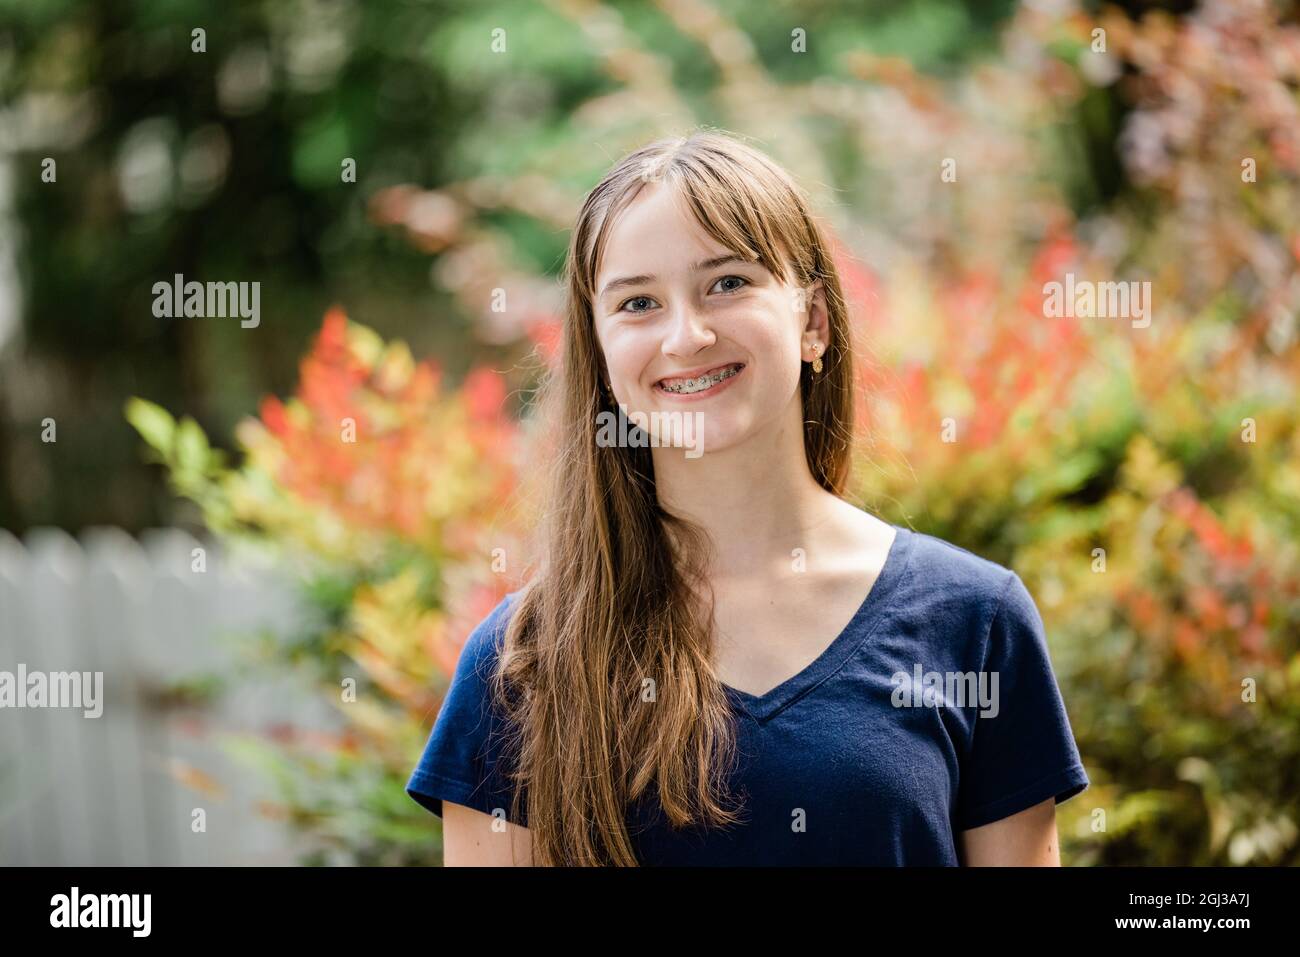 A teenage girl with long brown hair standing outside in a navy shirt Stock Photo